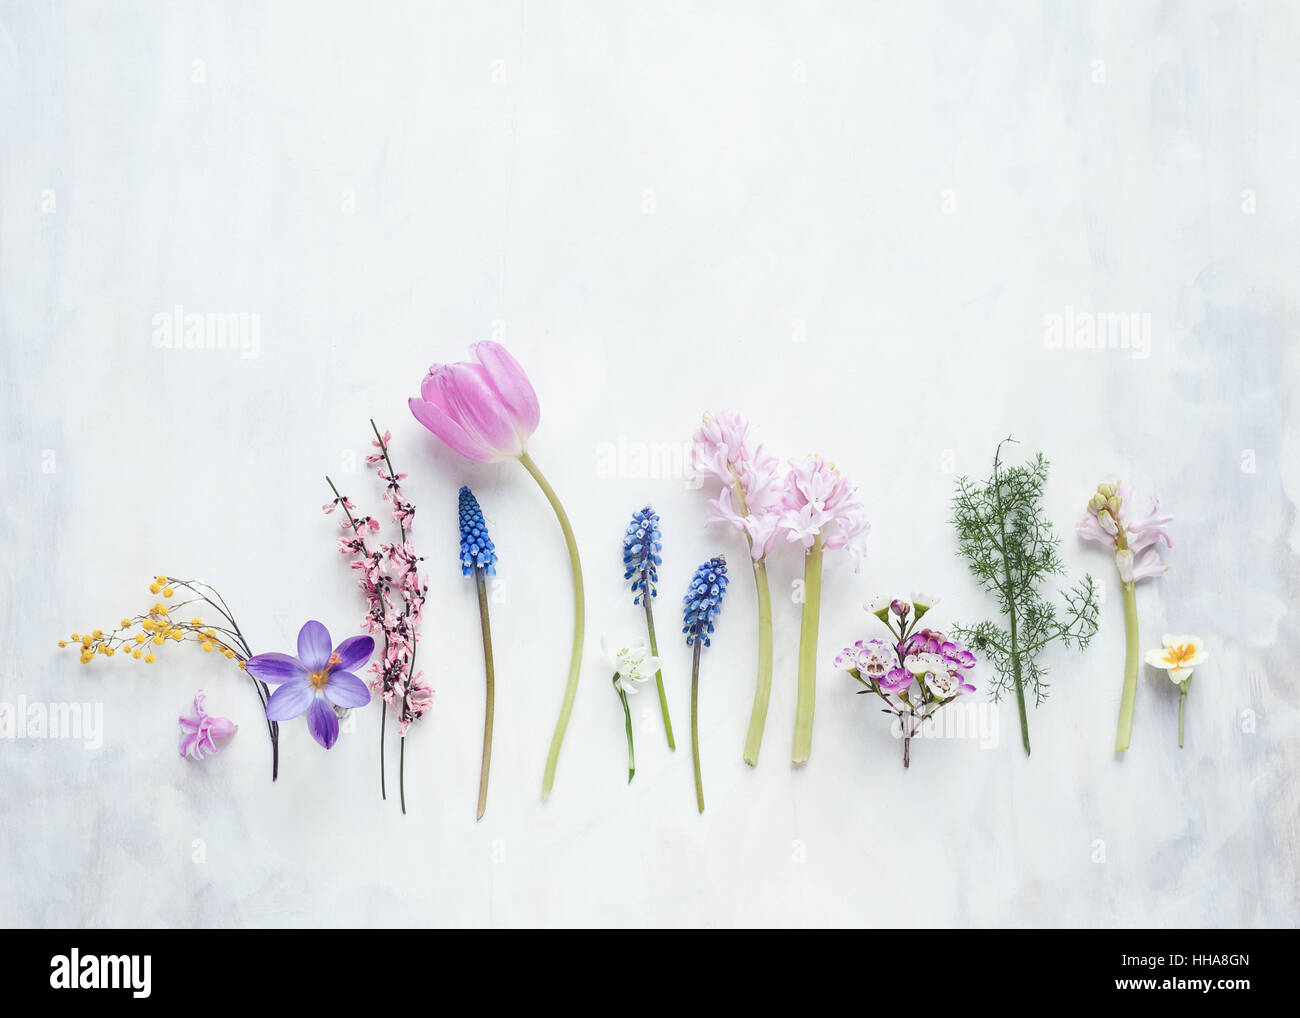 row of spring flowers laid out on a white and grey painted backdrop Stock Photo